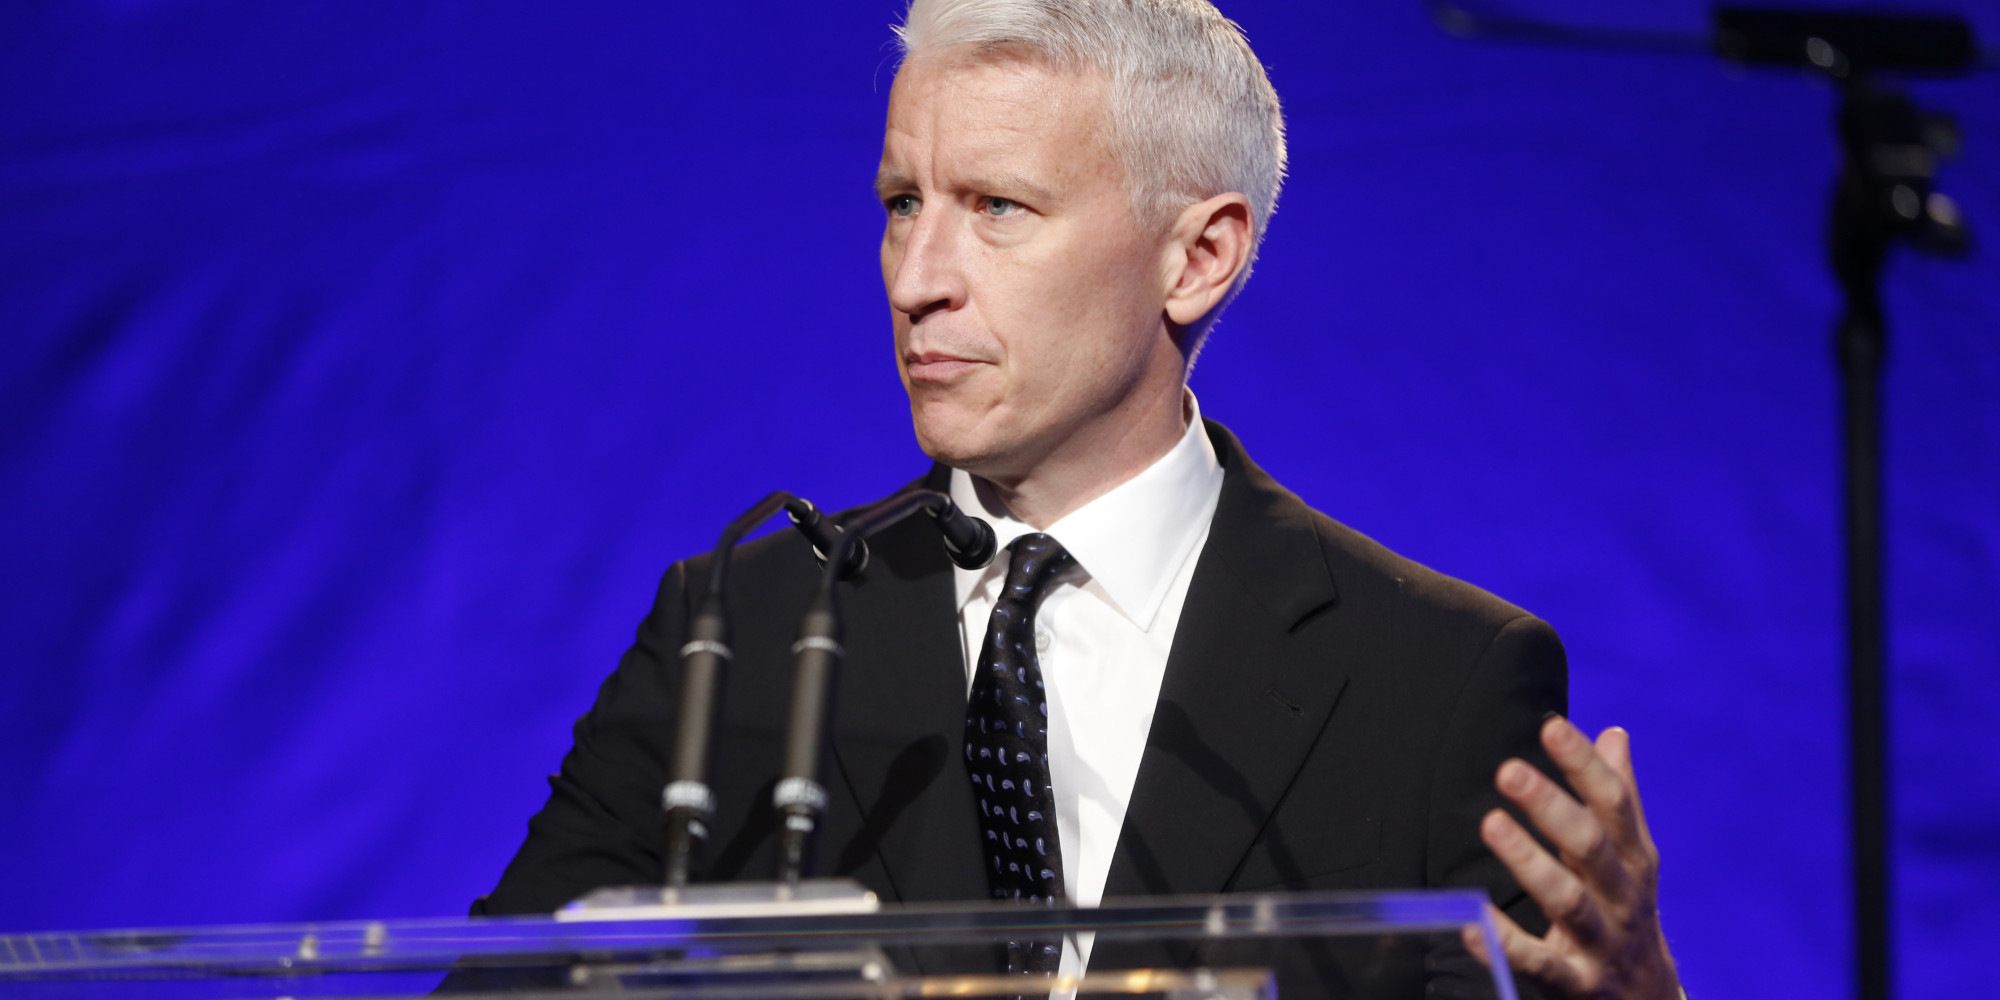 cnn-s-anderson-cooper-returns-to-ac360-following-emergency